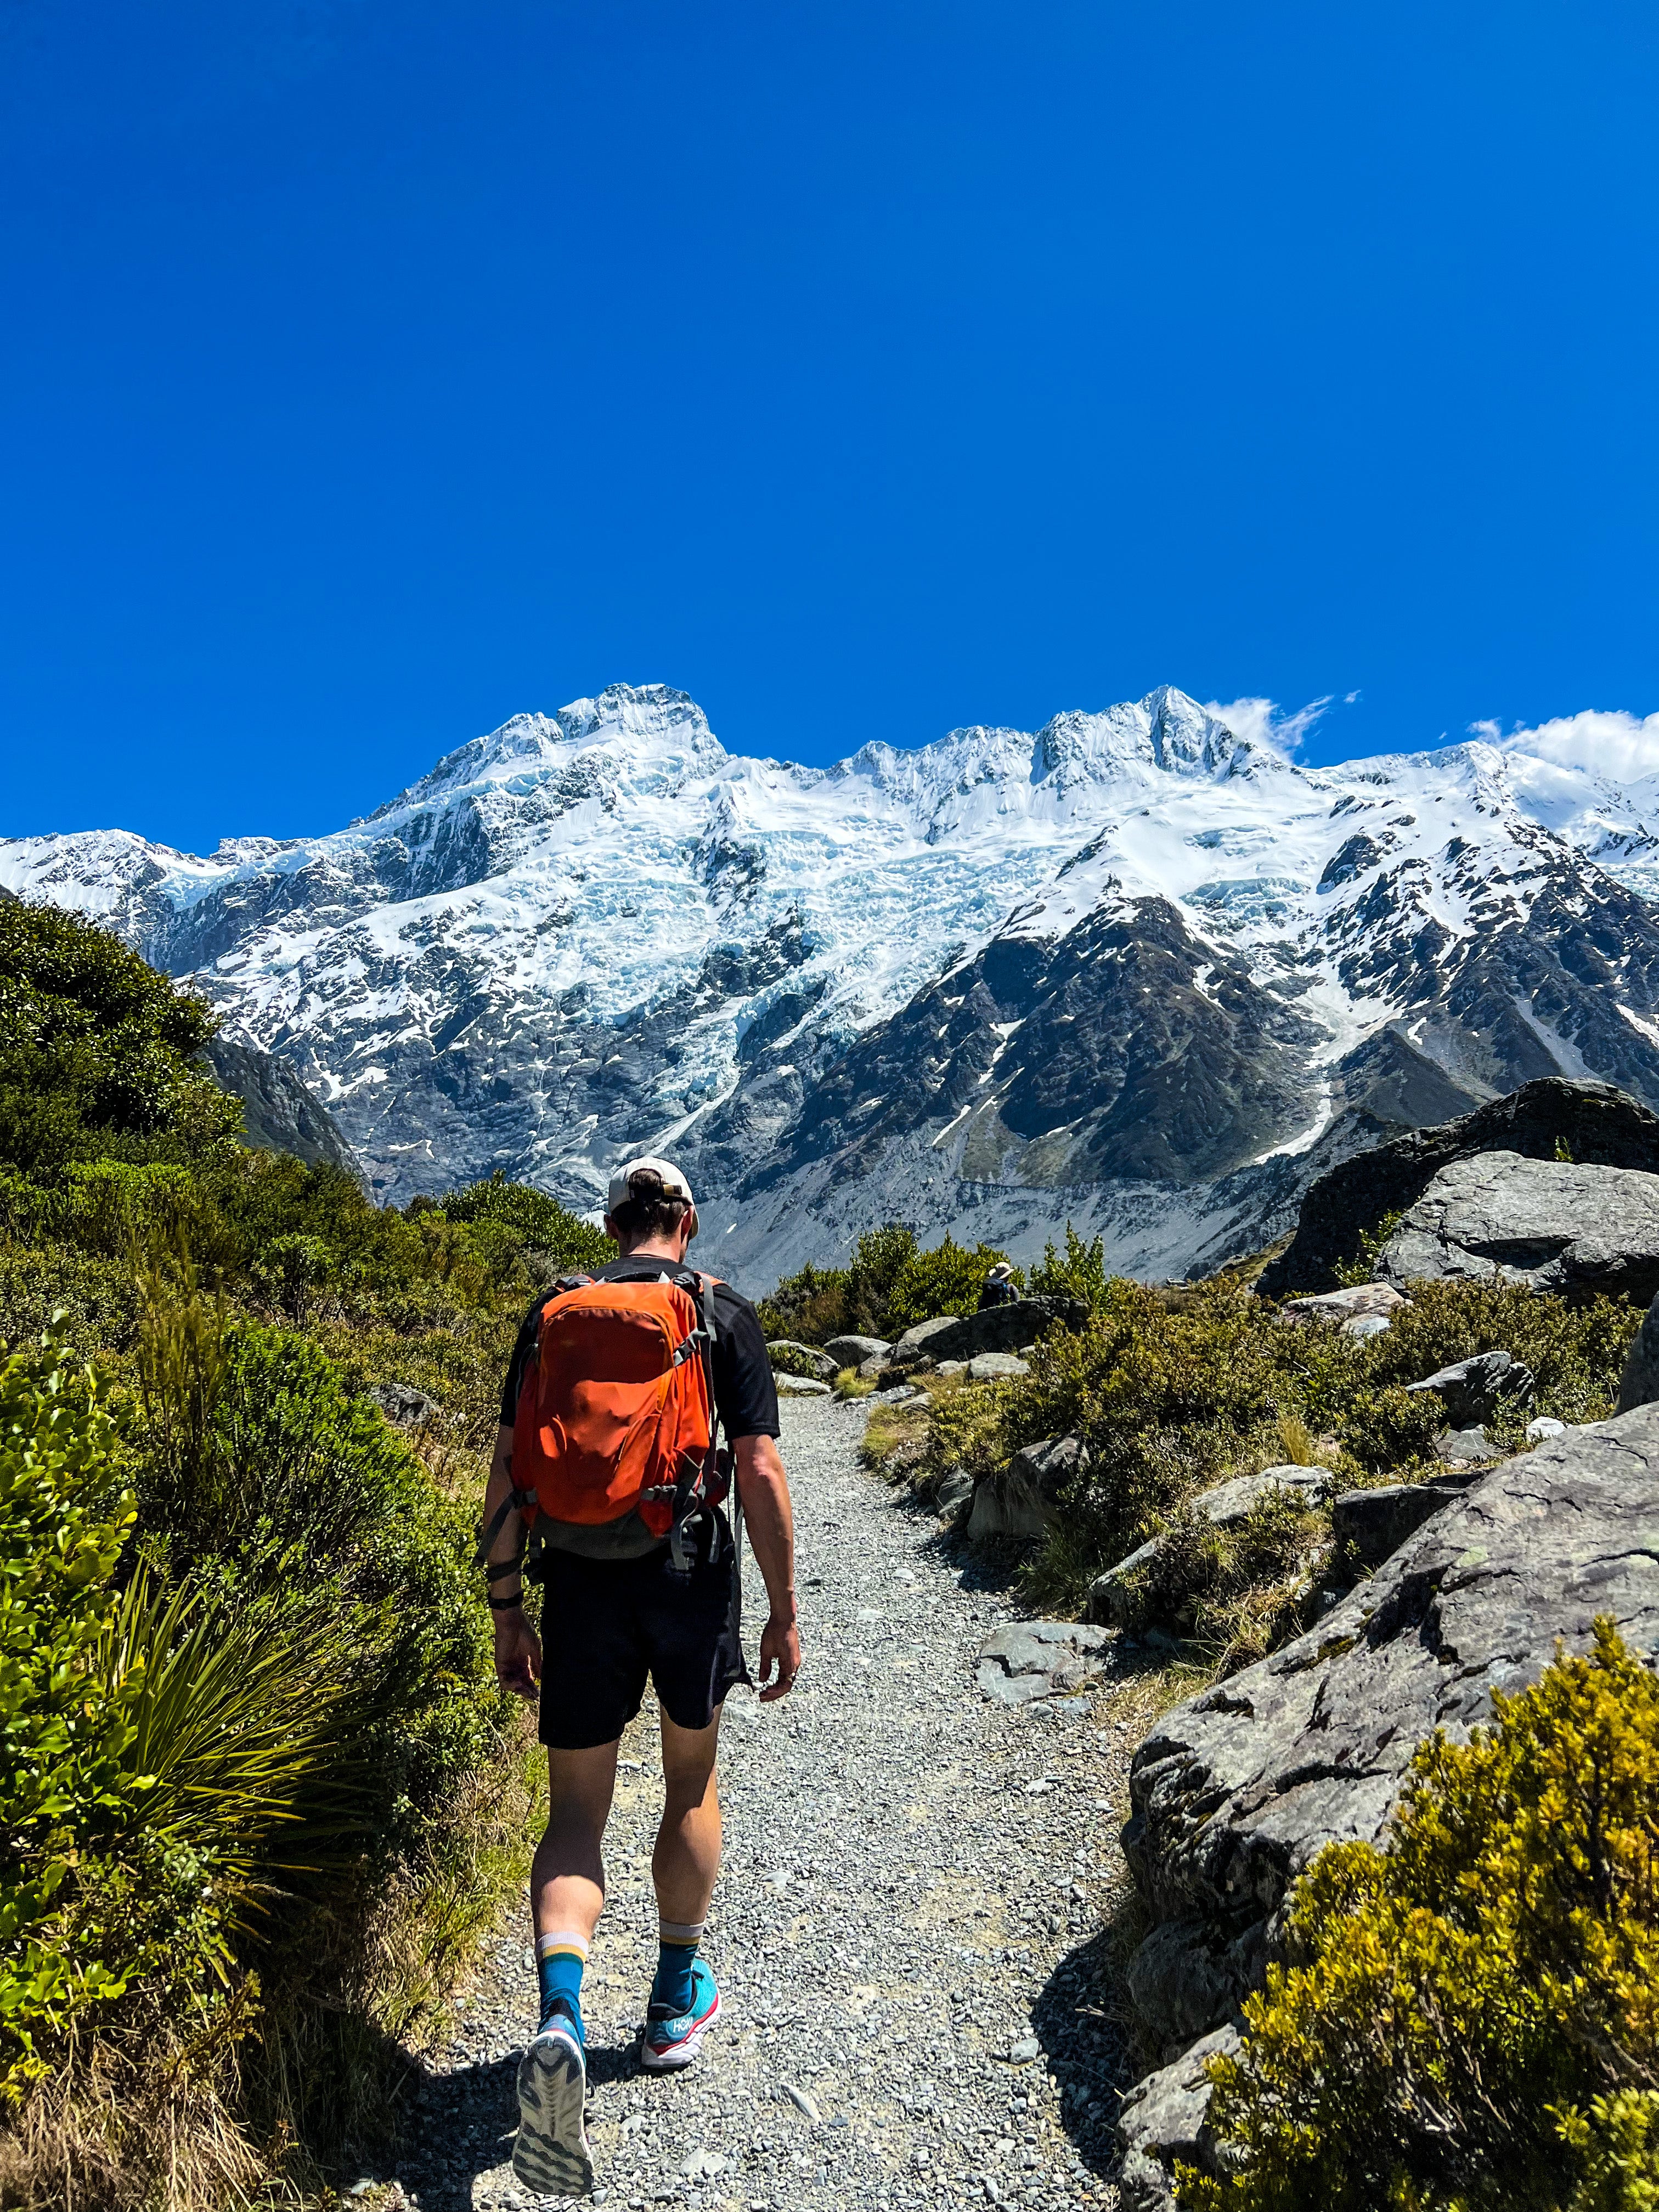 Hiking the Hooker Valley Track in Aoraki Mt. Cook National Park